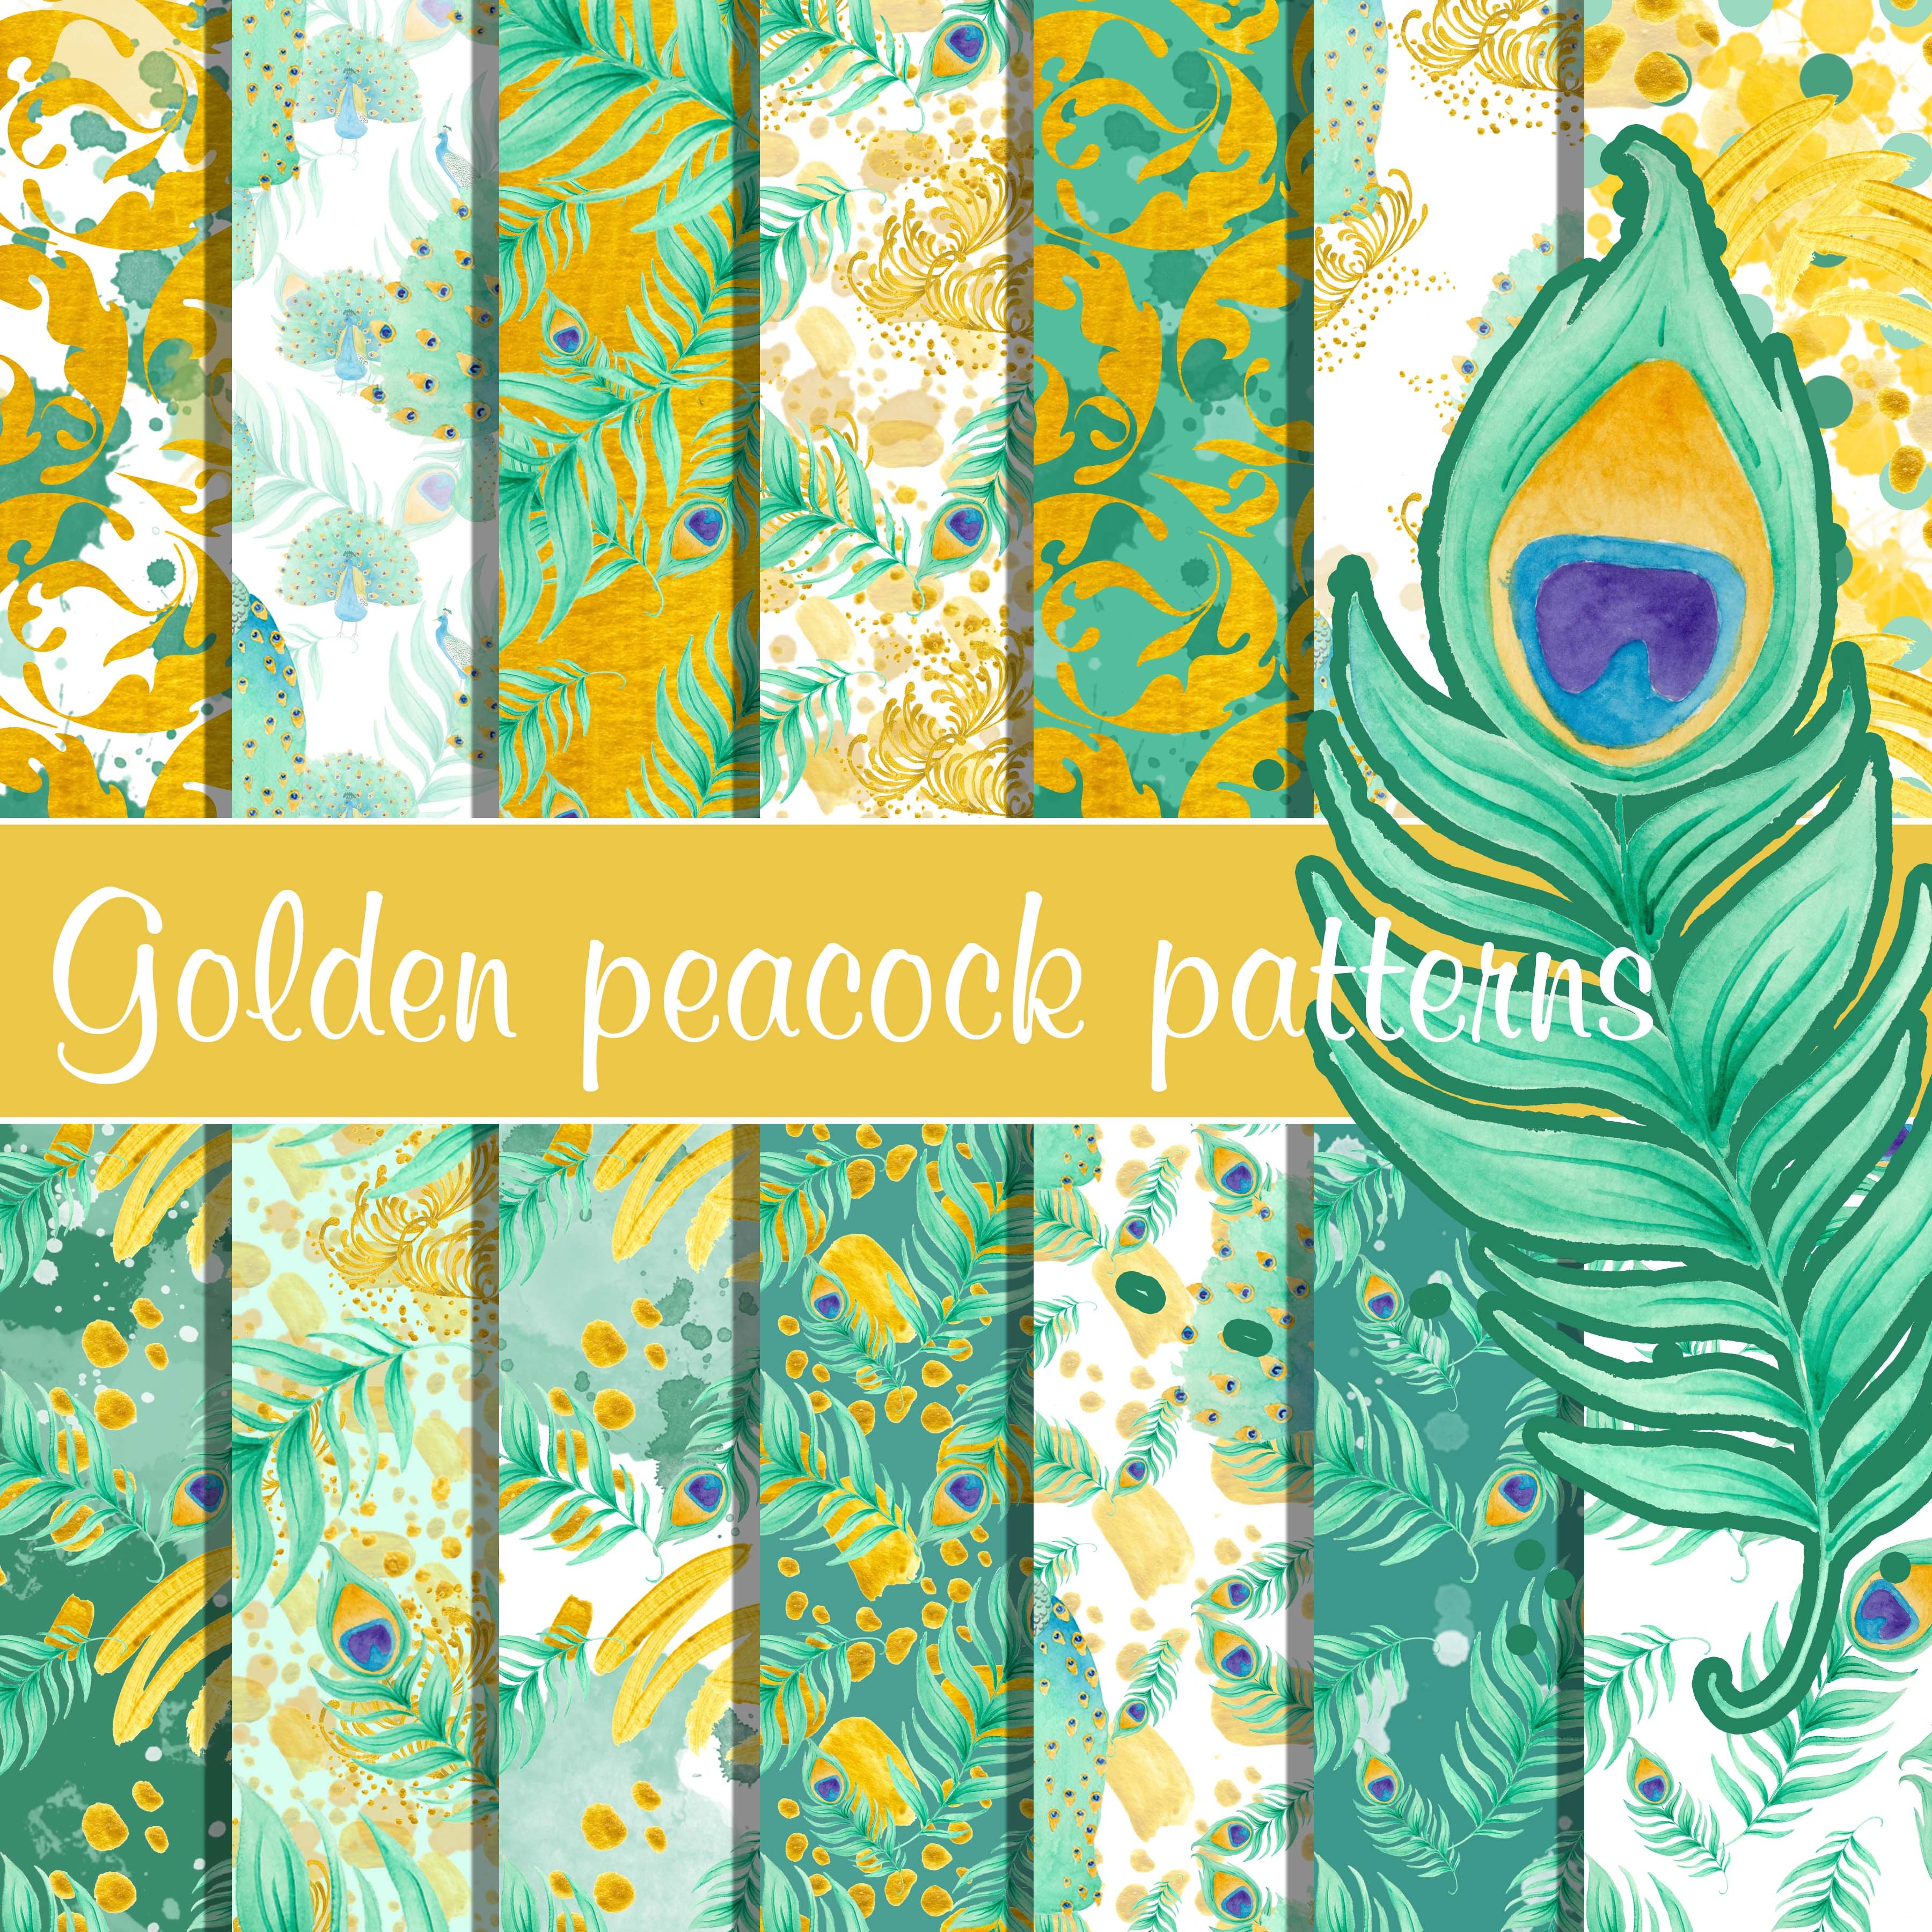 Peacock clipart and patterns preview image.